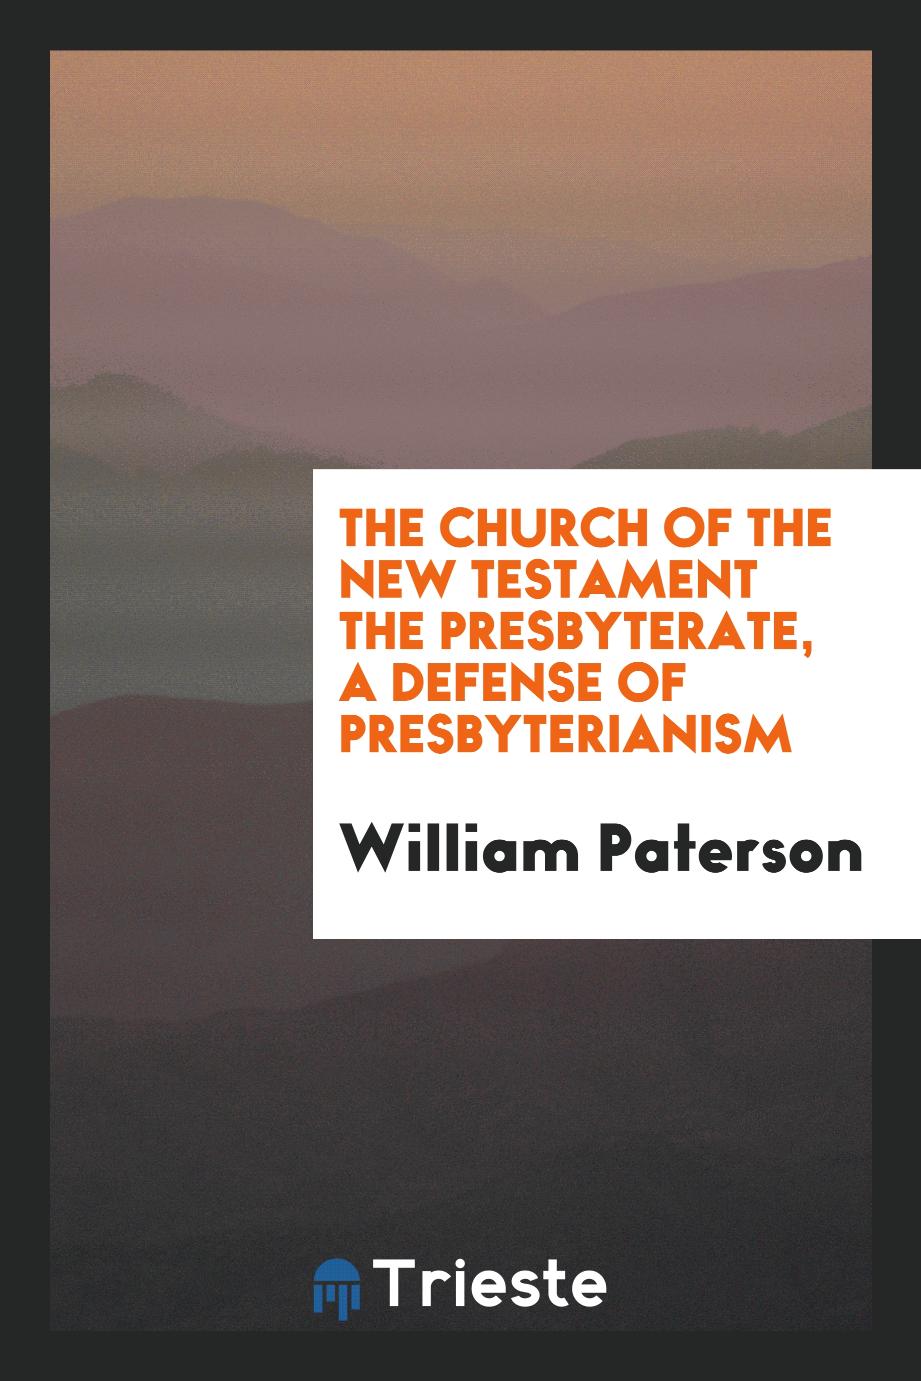 The church of the New Testament the Presbyterate, a defense of Presbyterianism